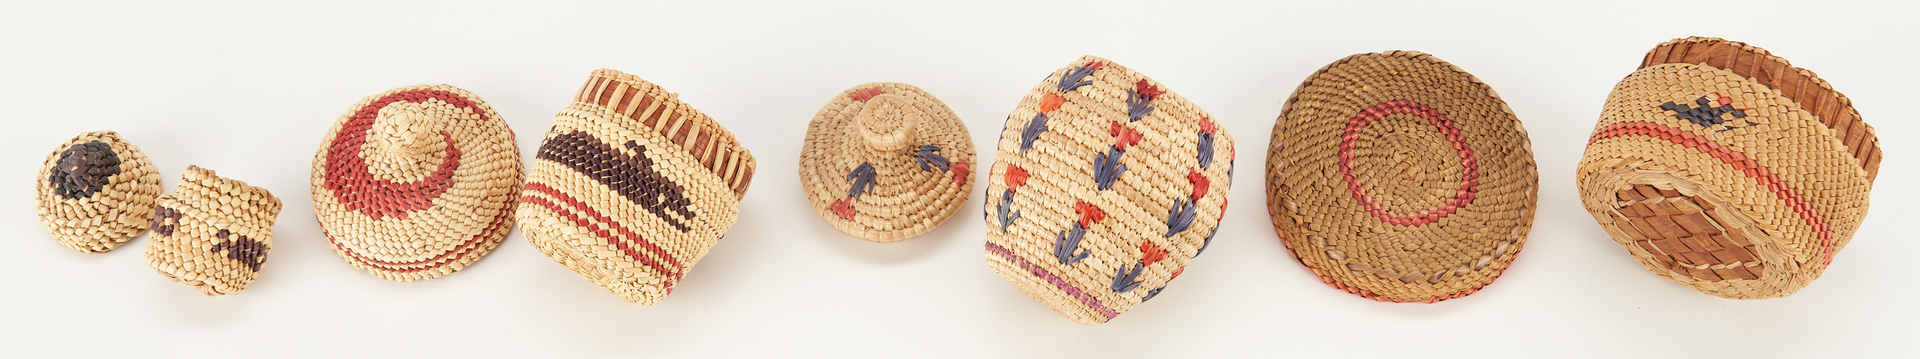 Lot 416: Group of 12 Native American Miniature Baskets & Quill Boxes